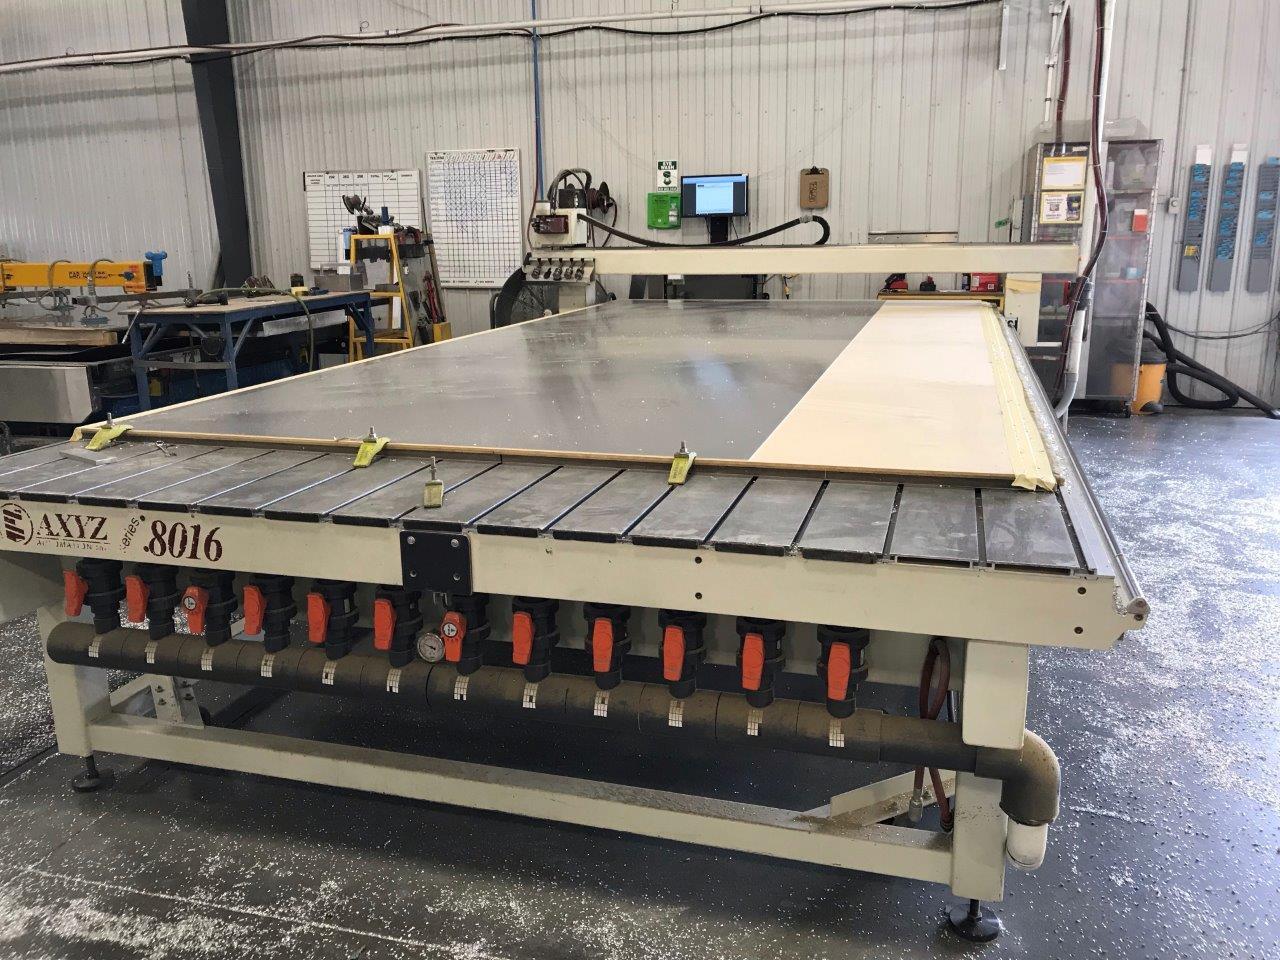 2001 AXYZ 8016 Used 3 Axis CNC Routers | CNC Router Store